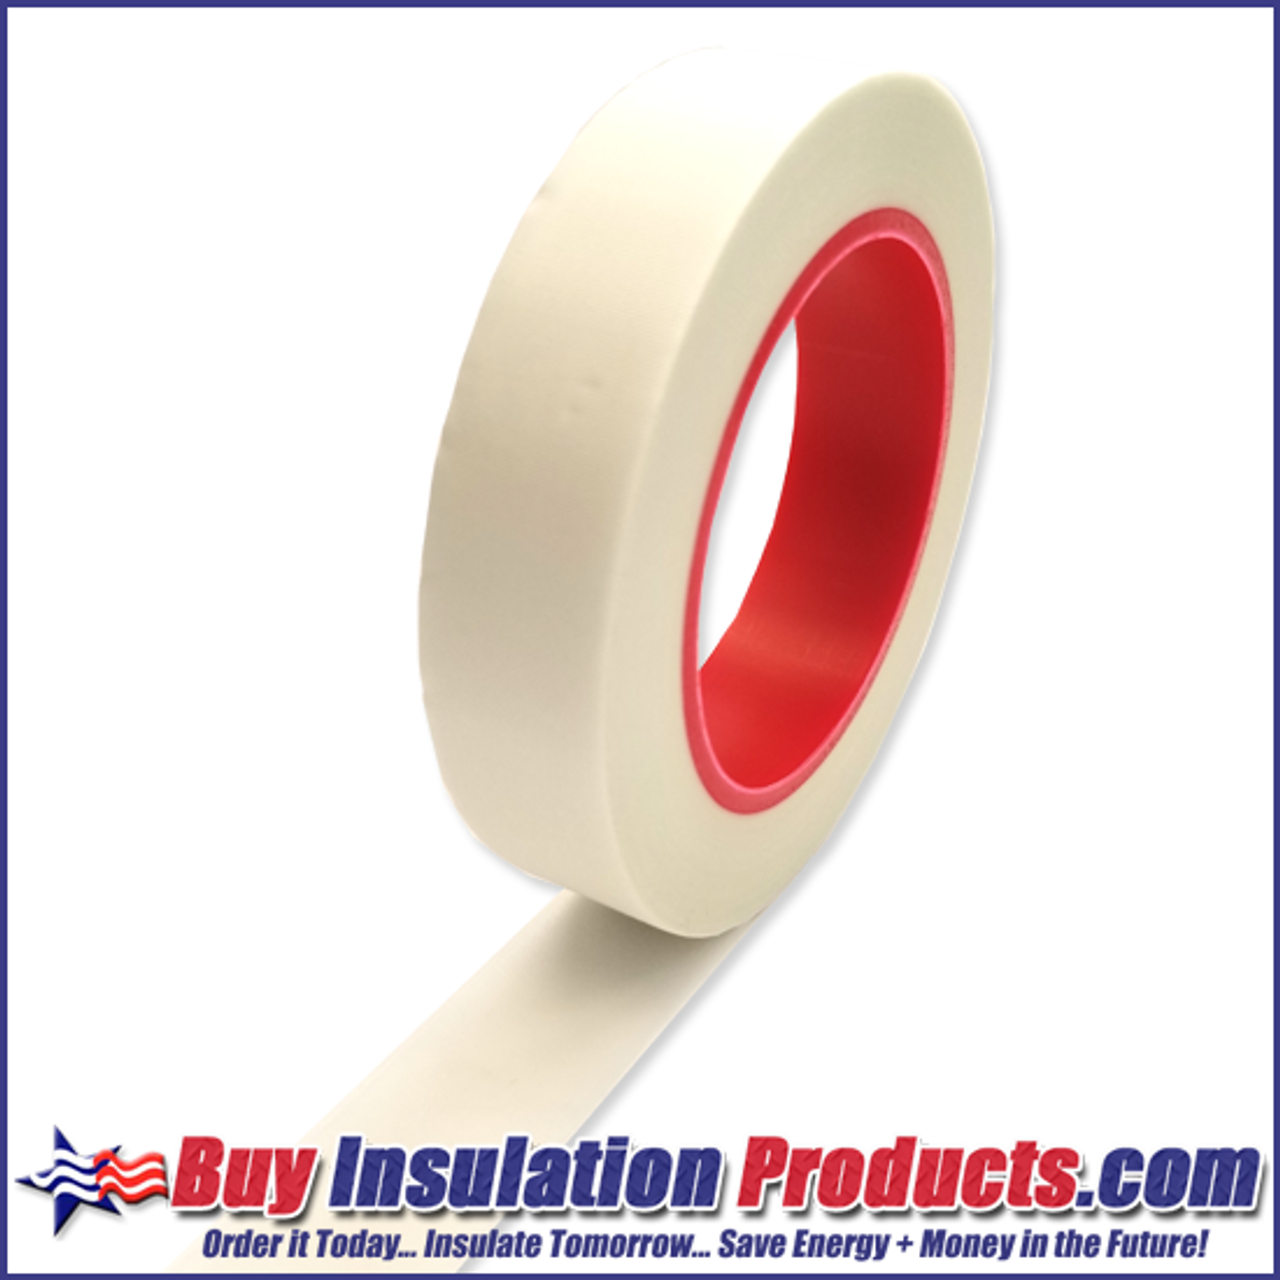 Silica Silicone High Temperature Adhesive Tape, Size: 50mm at Rs